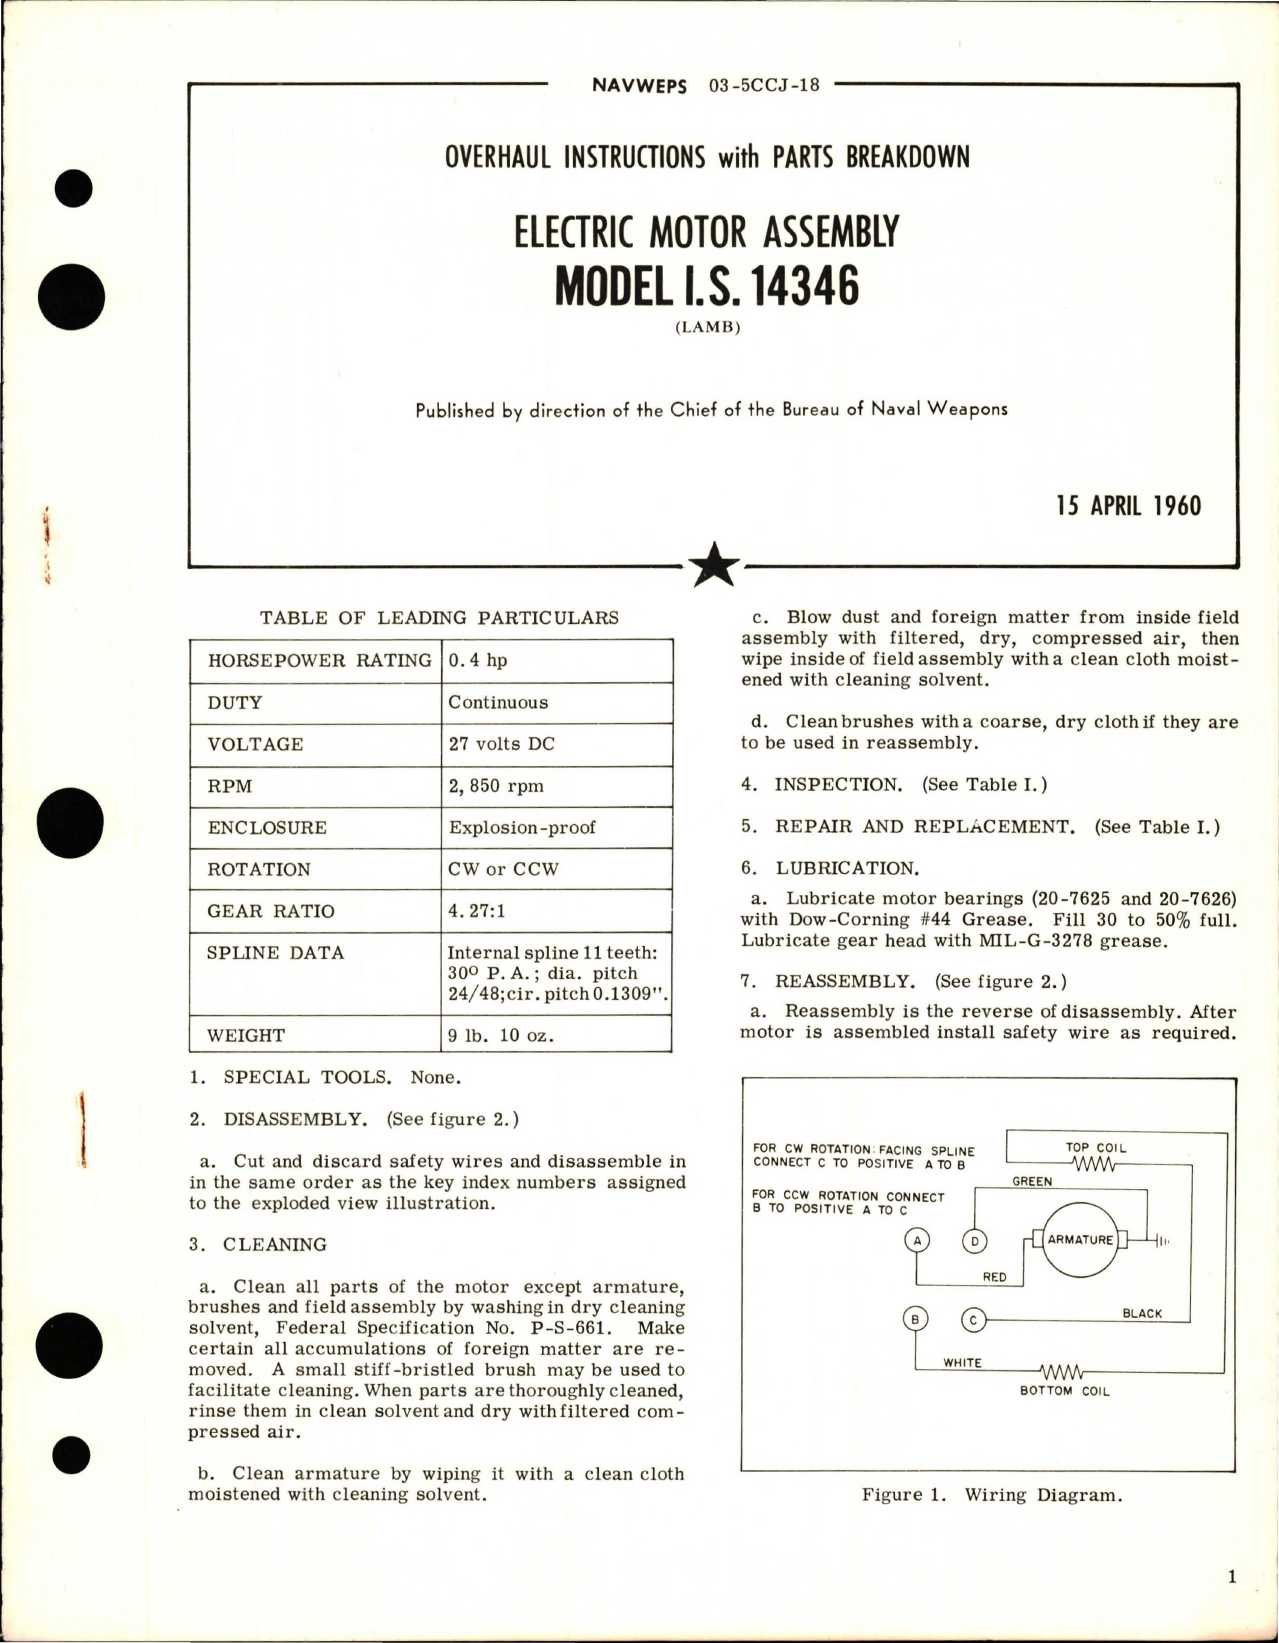 Sample page 1 from AirCorps Library document: Overhaul Instructions with Parts Breakdown for Electric Motor Assembly - Model IS 14346